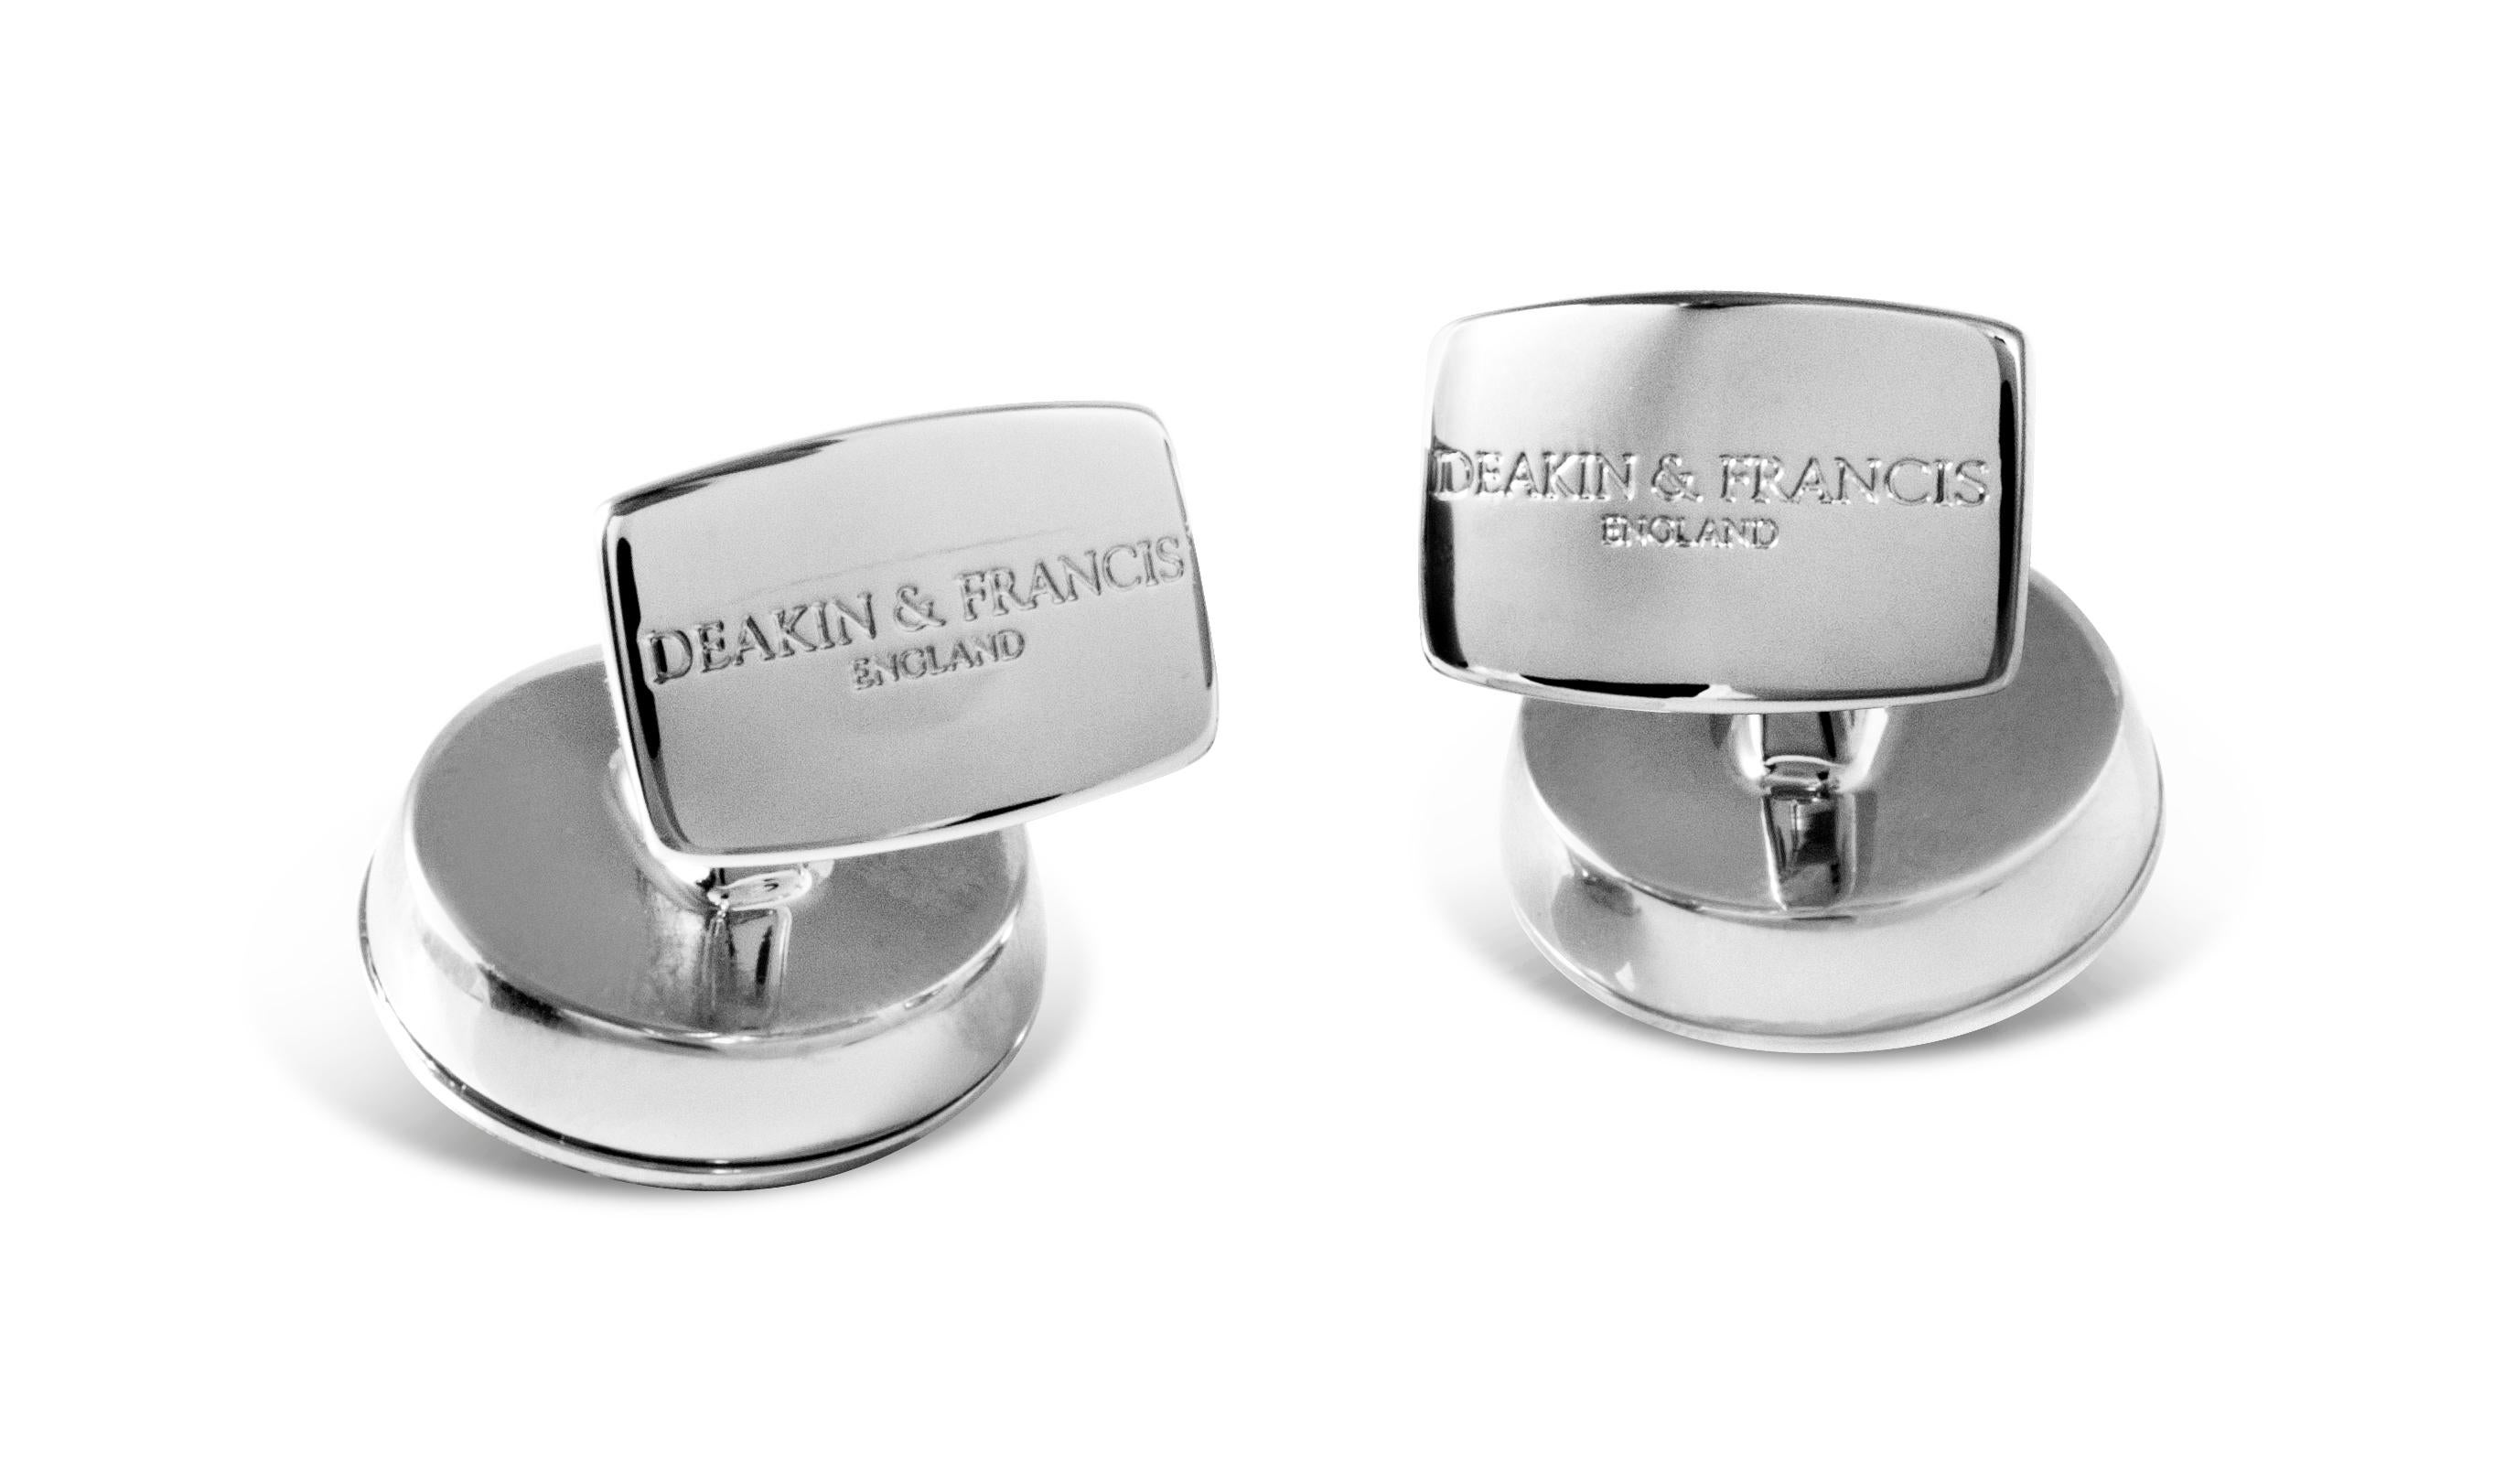 DEAKIN & FRANCIS, Piccadilly Arcade, London

Take your chances and hedge your bets by adding a playful touch to your outfit! With detailed enamelled faces, these double dice, white rhodium plated cufflinks are sure to roll you some luck!